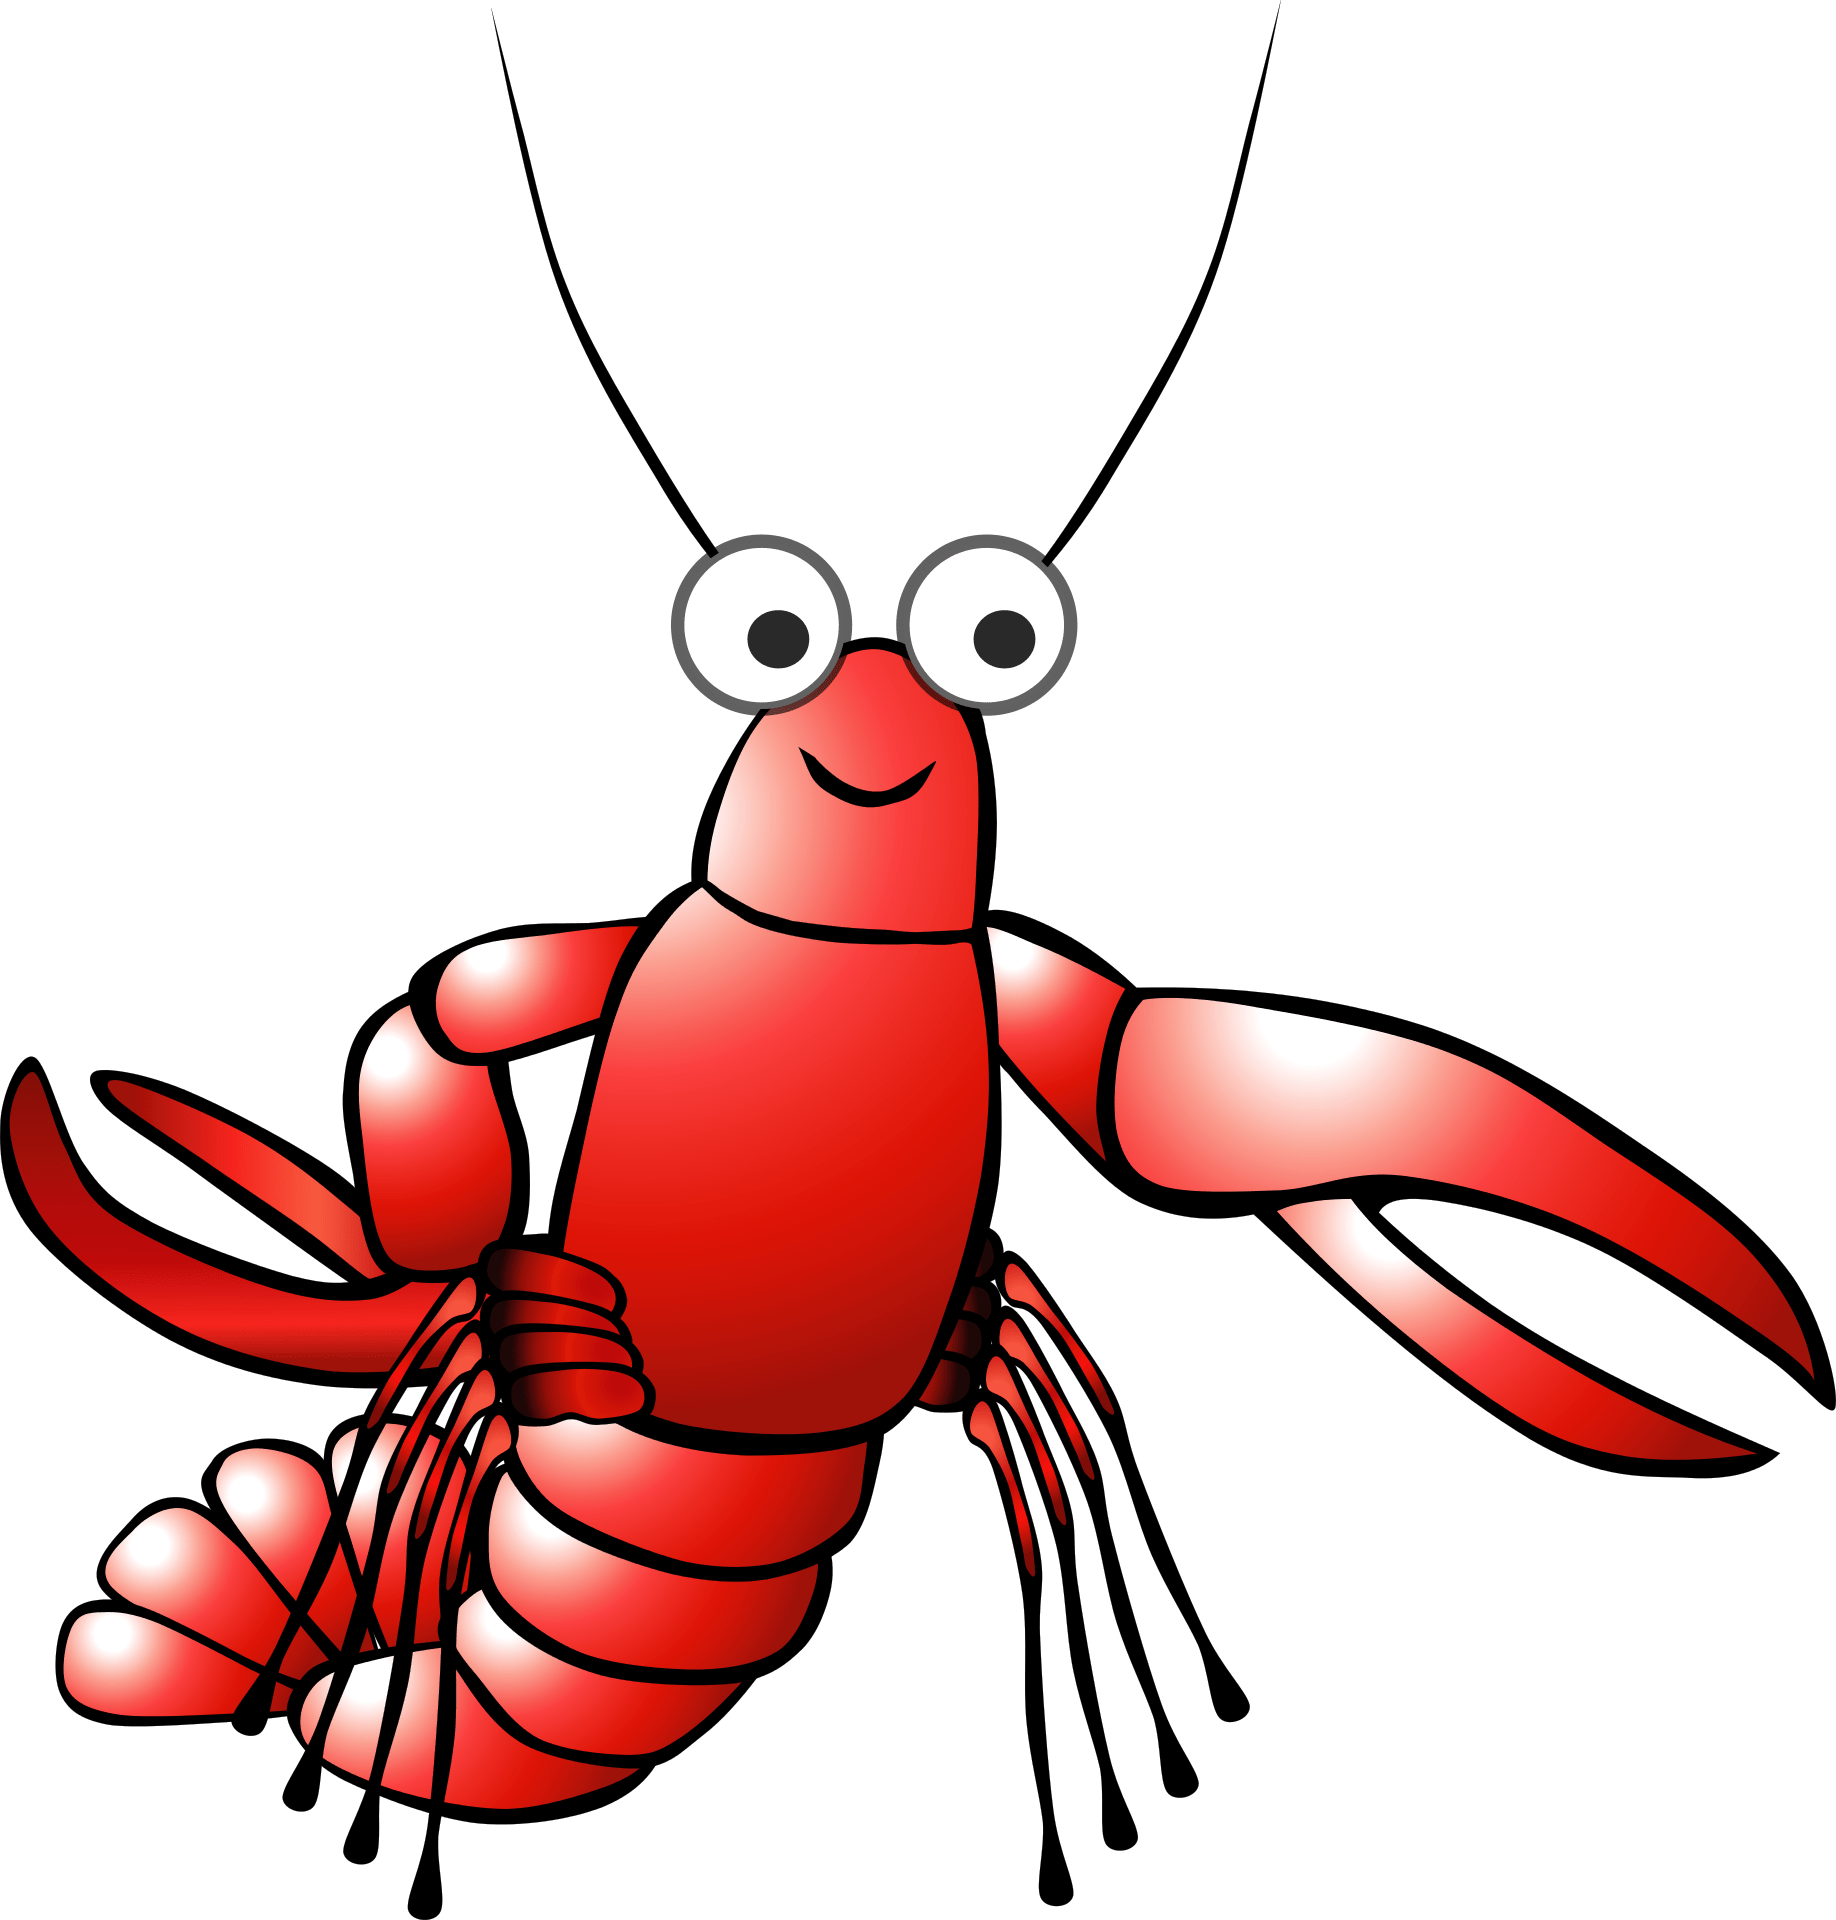 Pic The Larry Lobster PNG Image High Quality PNG Image